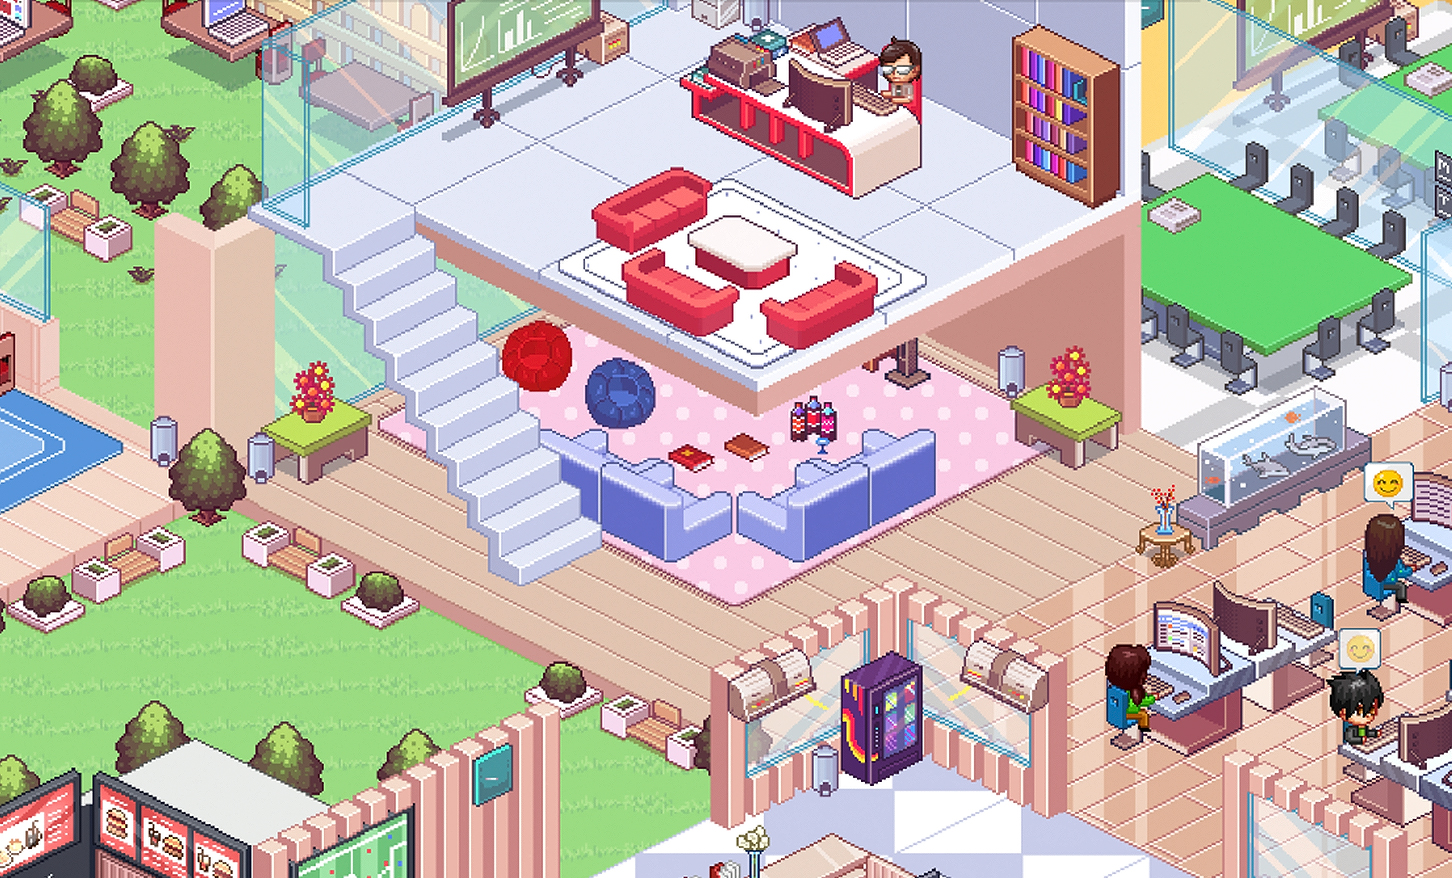 Startup Panic brings personality back to the business management sim